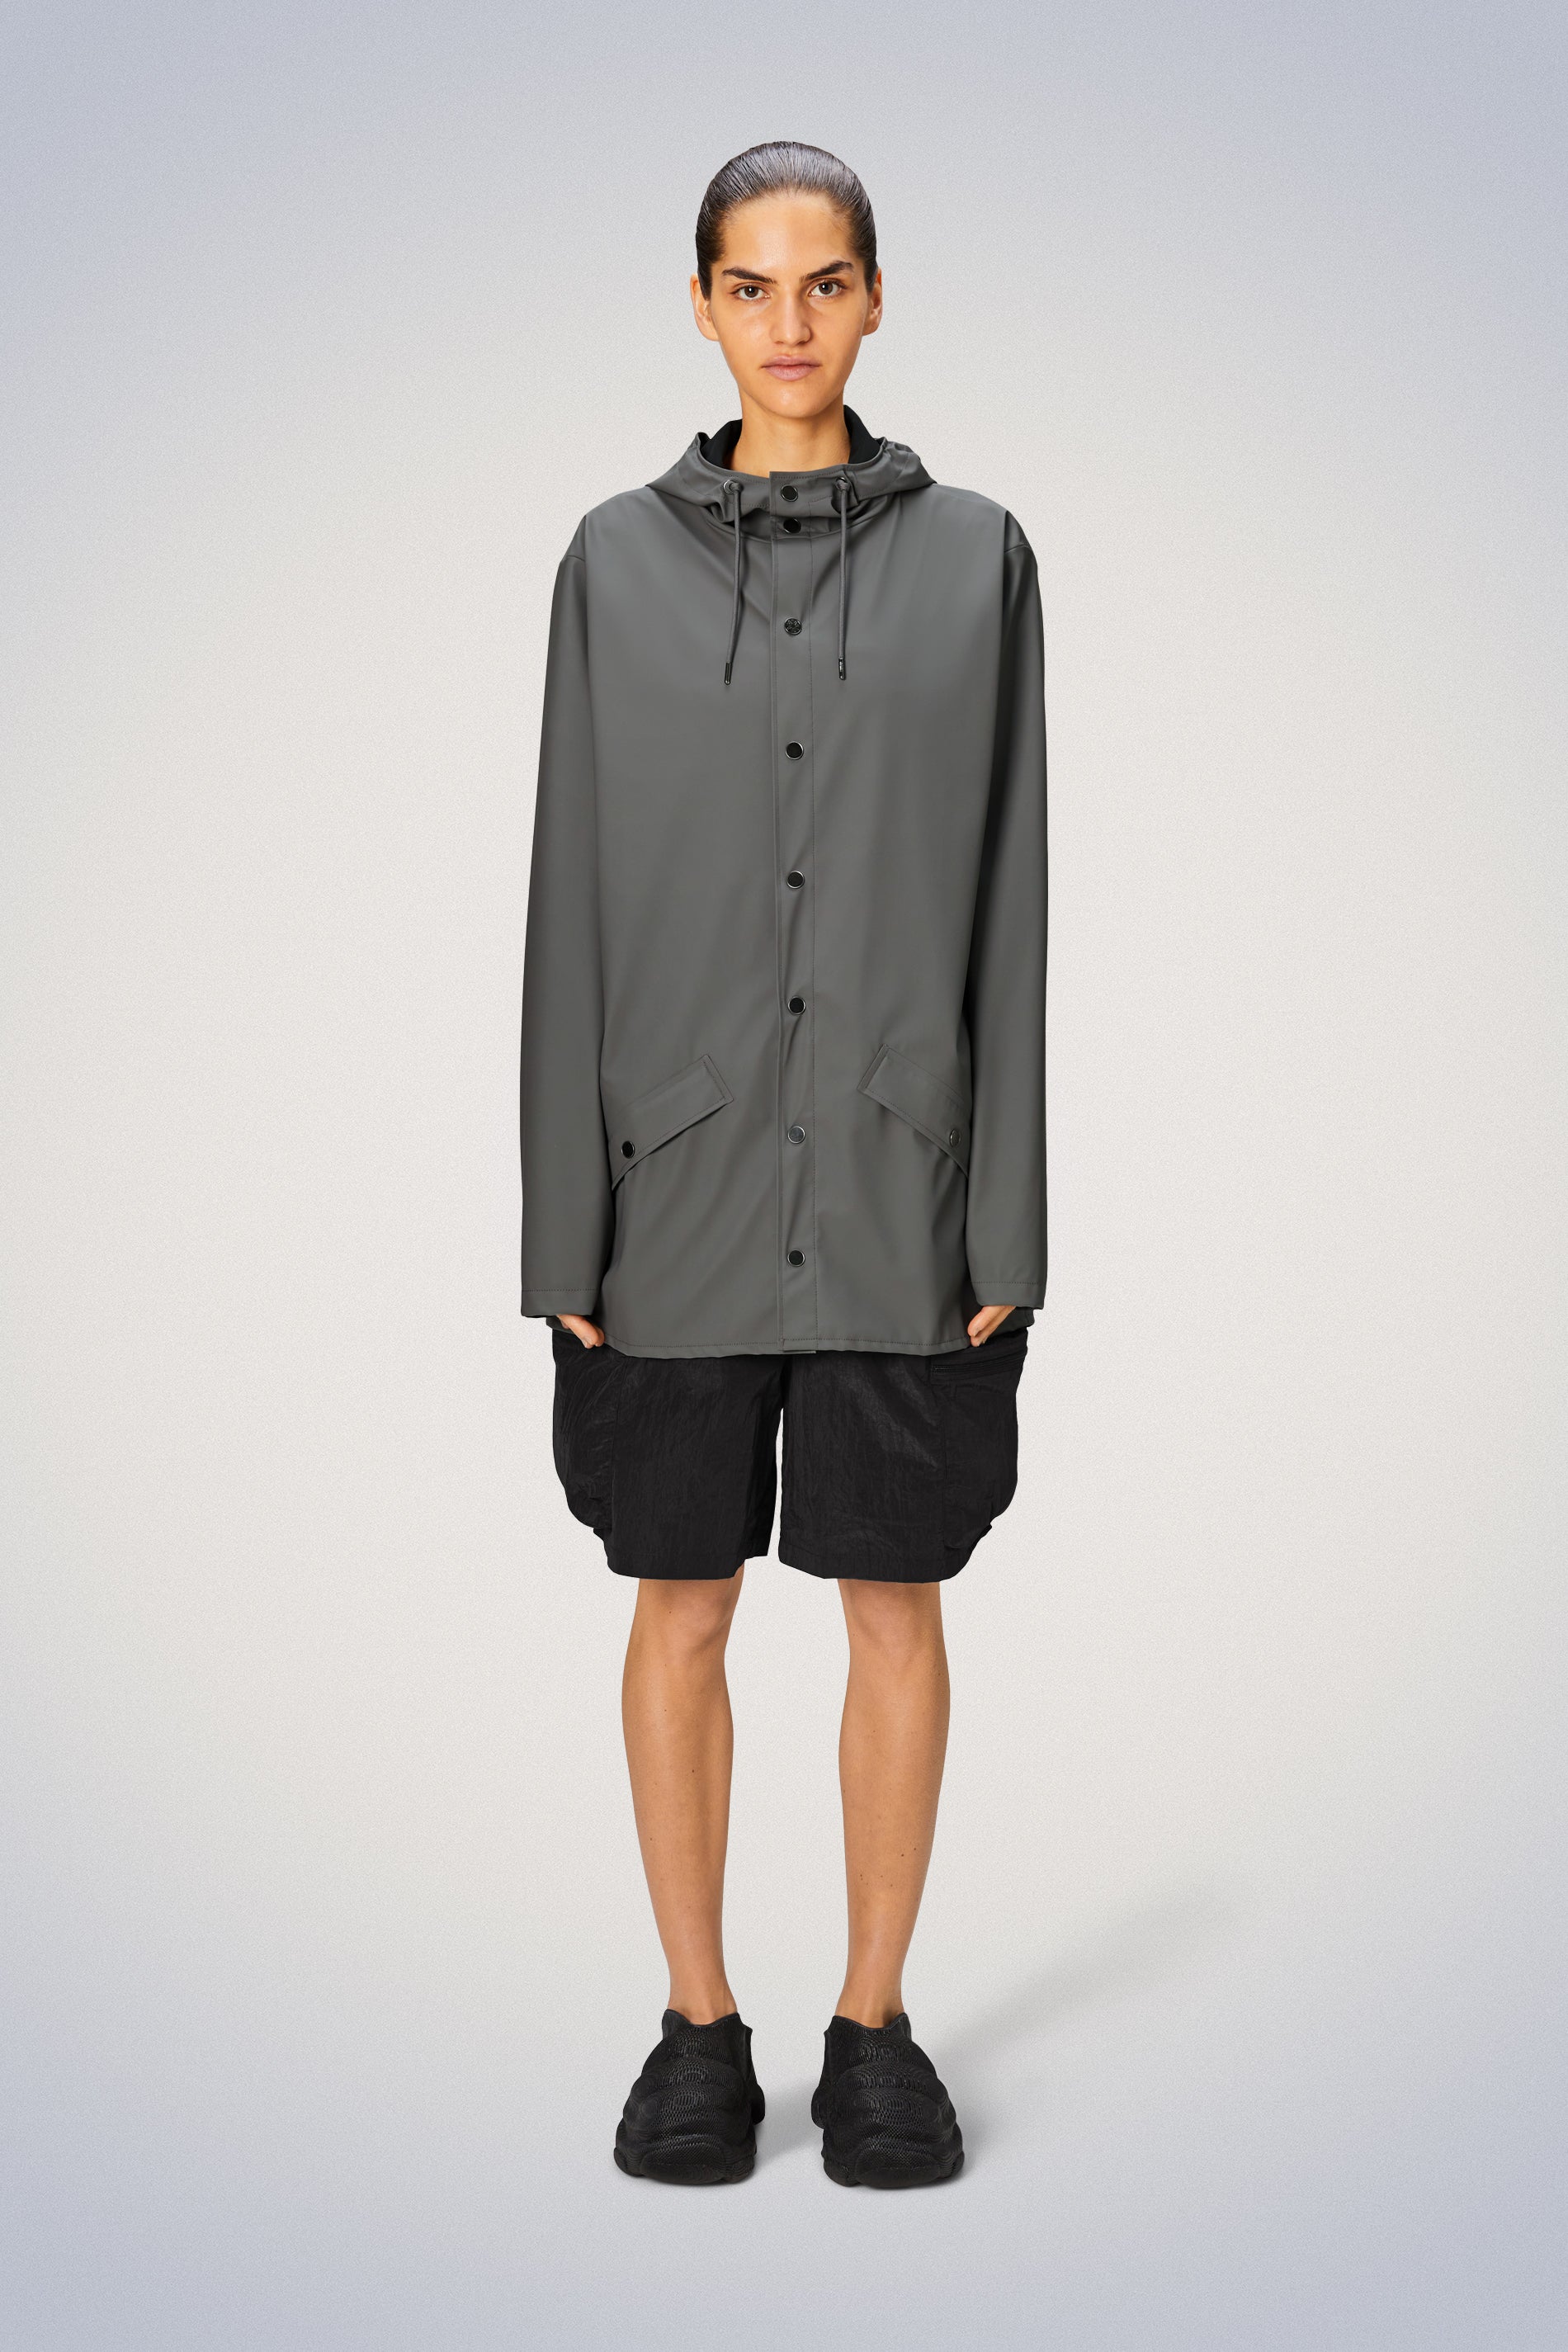 Rains® Jacket in Black for $110 | Free Shipping